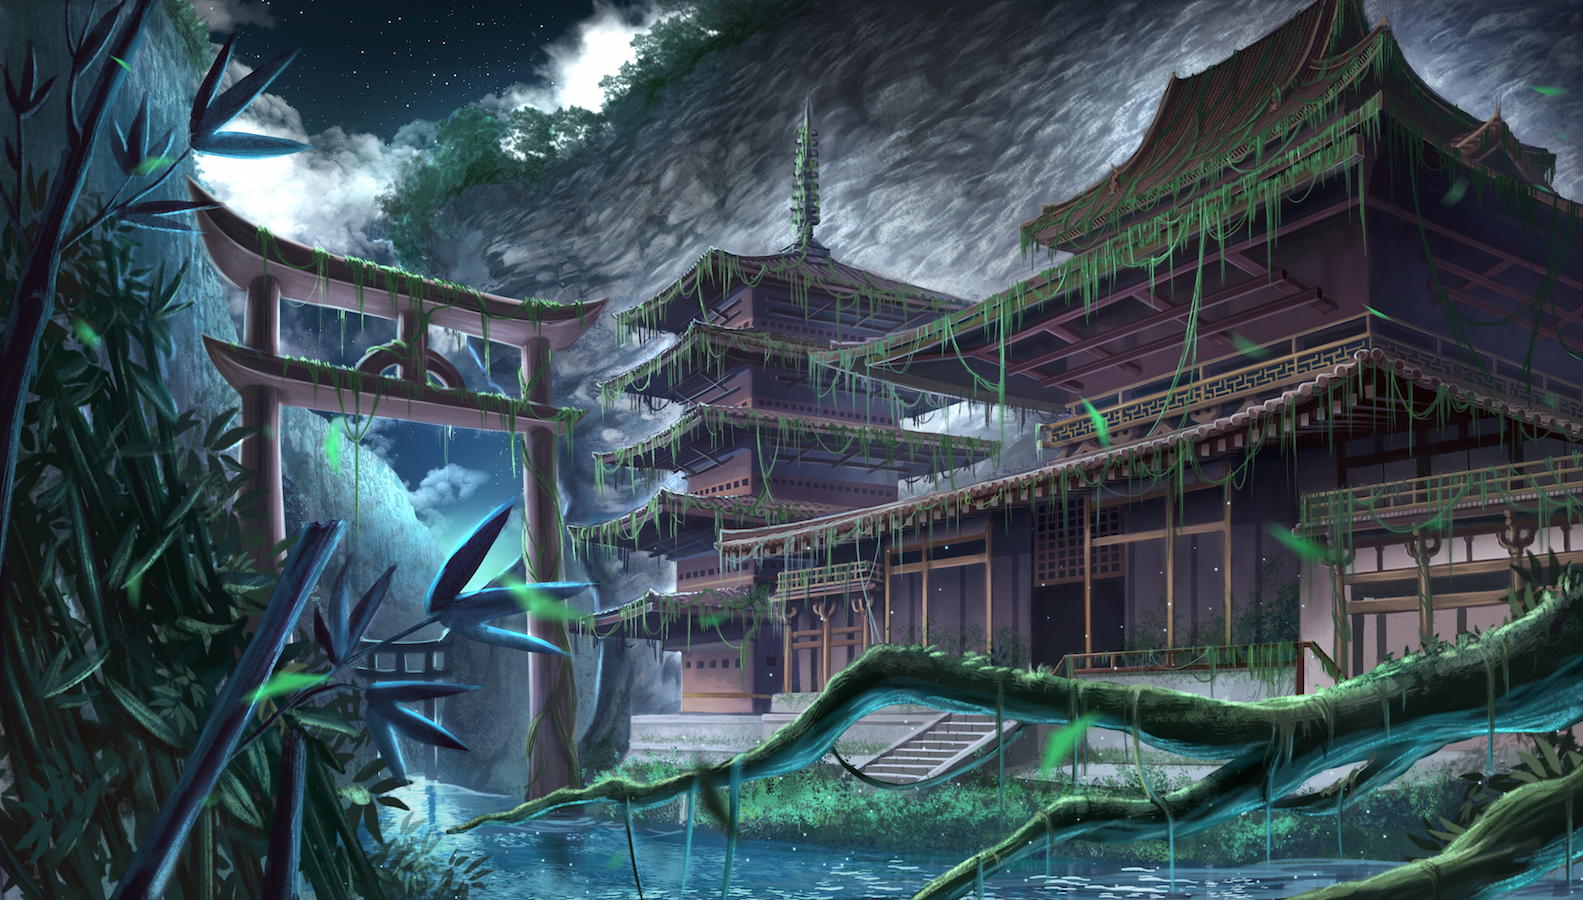 Nestled deeply in a hidden ravine far inside the Shinomen Mori, the temple waited. It was a memory of a time before man, before even the Naga, and no one had disturbed it for untold thousands of years… until now.